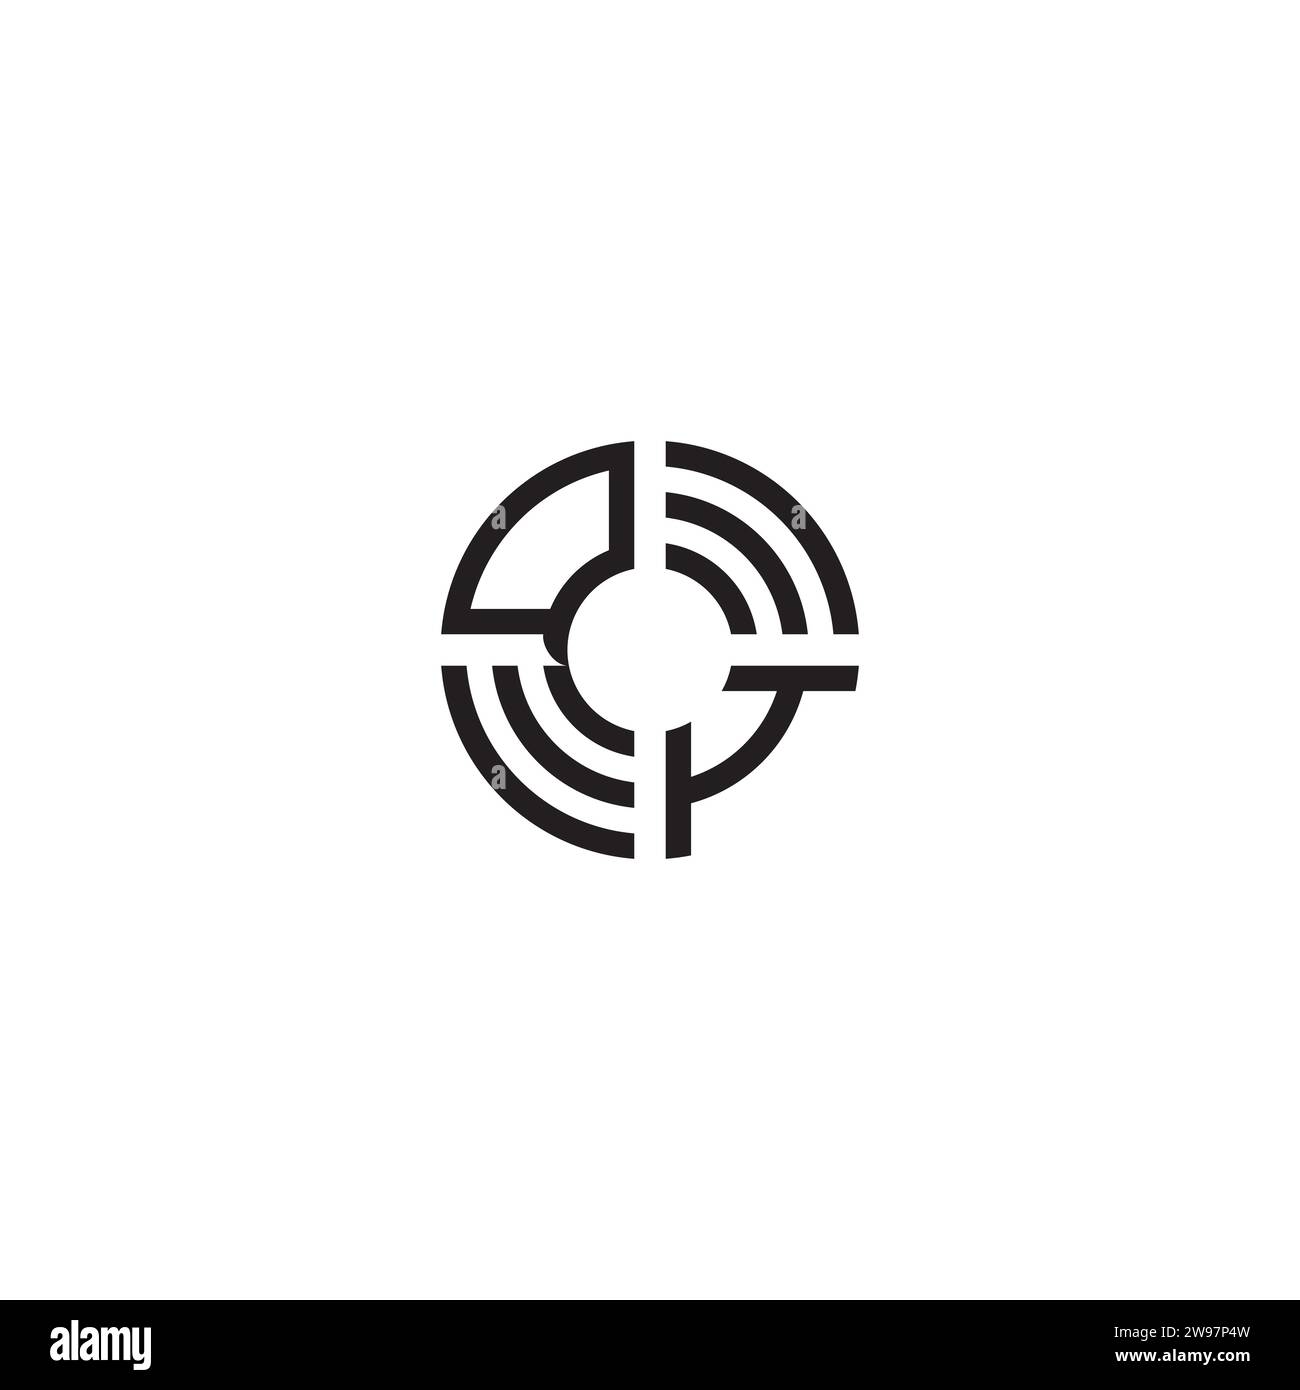 IQ circle initial logo concept in high quality professional design that will print well across any print media Stock Vector